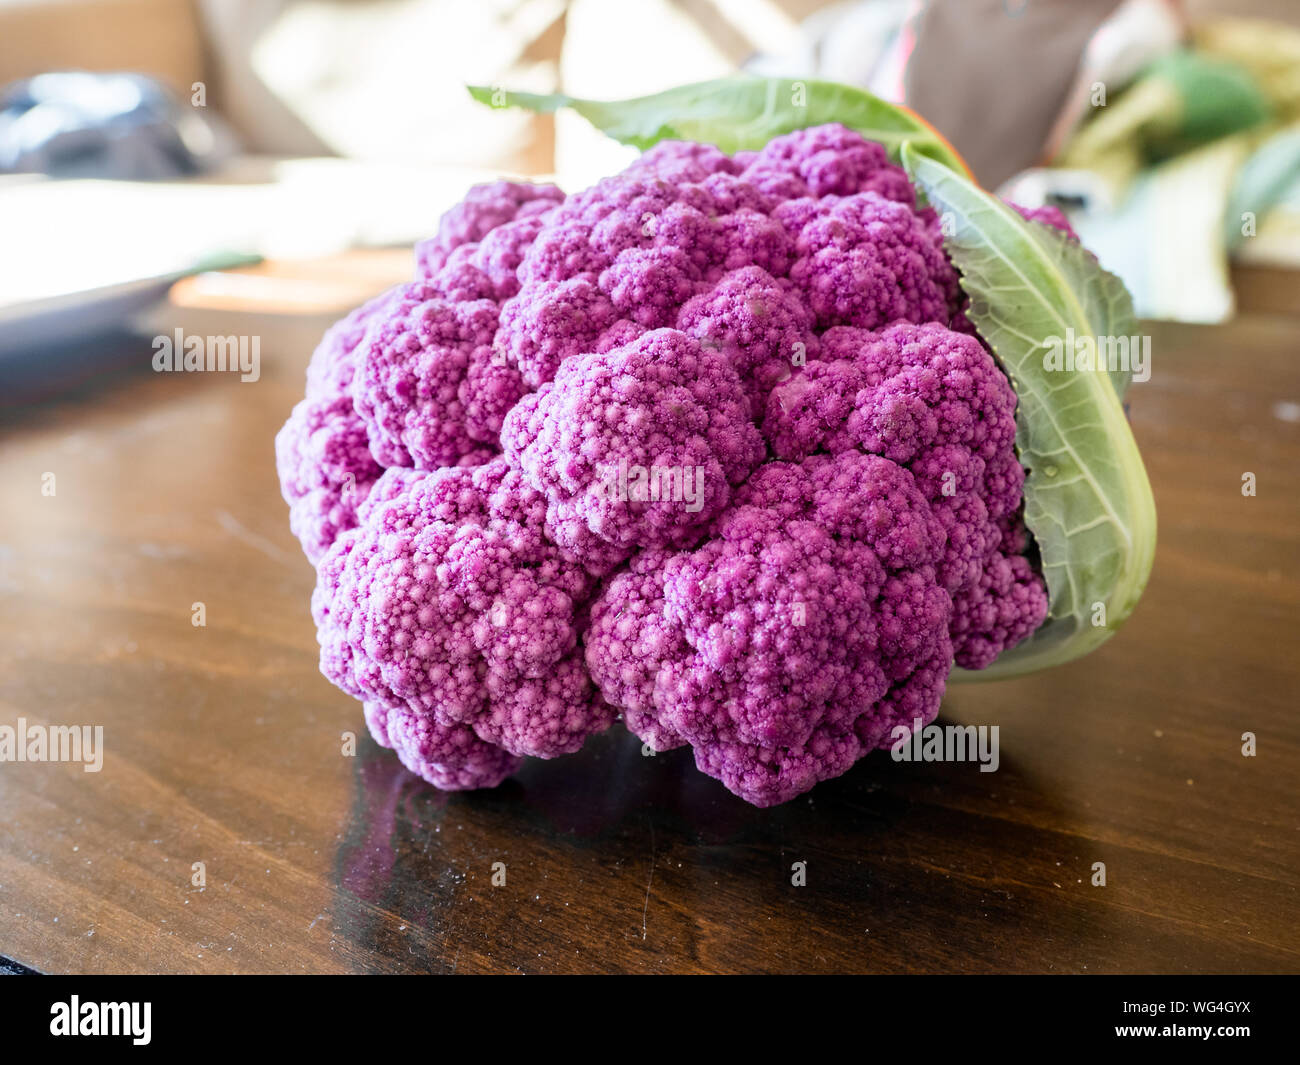 Close up view of organic purple cauliflower from farmer's market, Brassica oleracea var. botrytis, belonging to the plant order Capparales, gets color Stock Photo